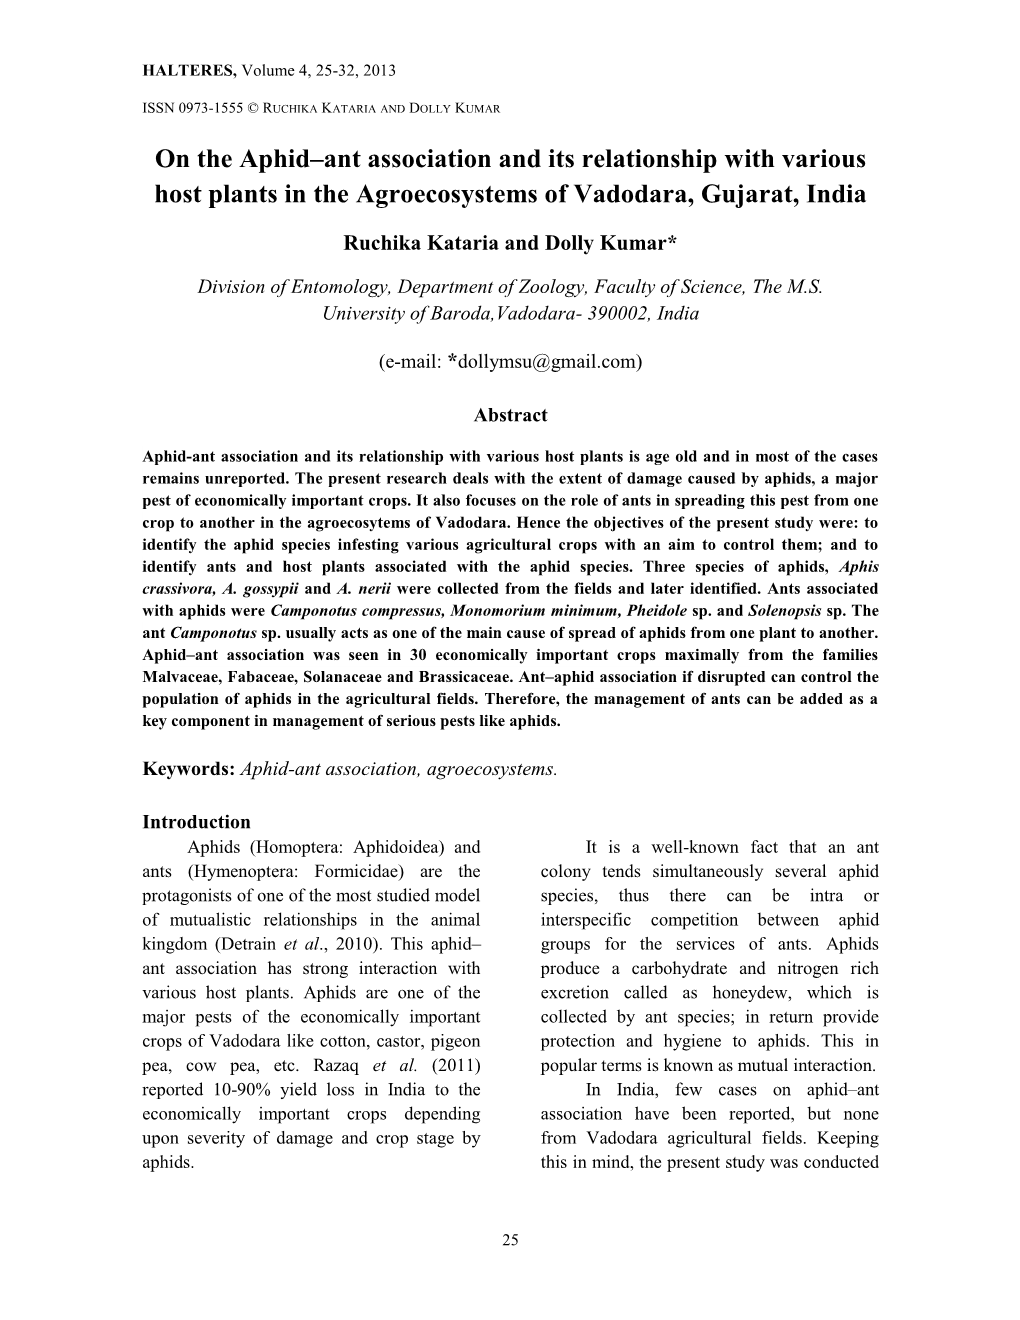 On the Aphid–Ant Association and Its Relationship with Various Host Plants in the Agroecosystems of Vadodara, Gujarat, India